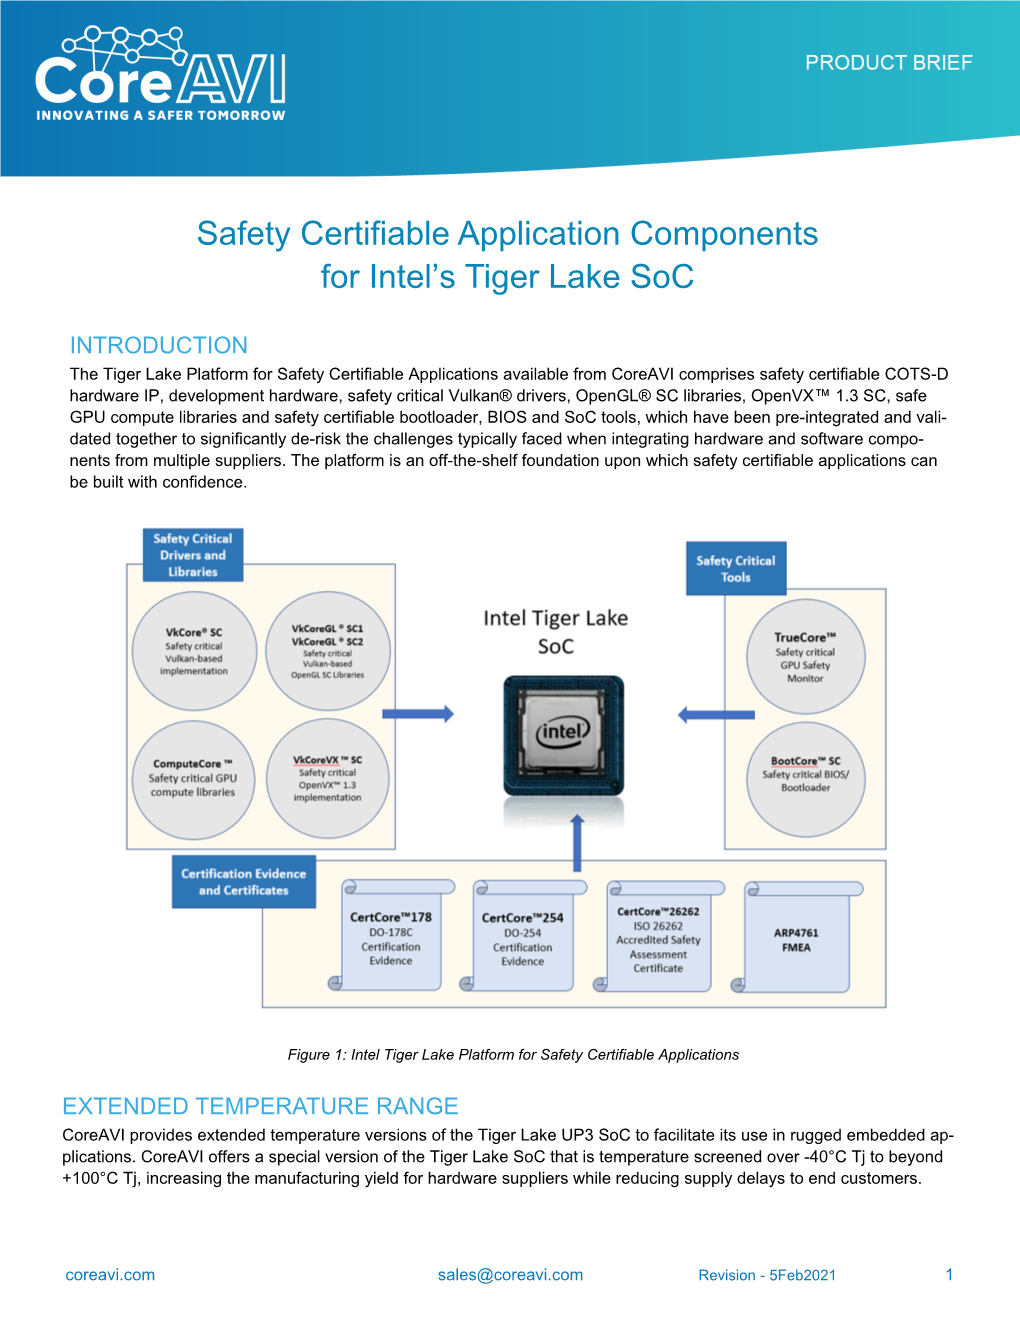 Safety Certifiable Application Components for Intel's Tiger Lake